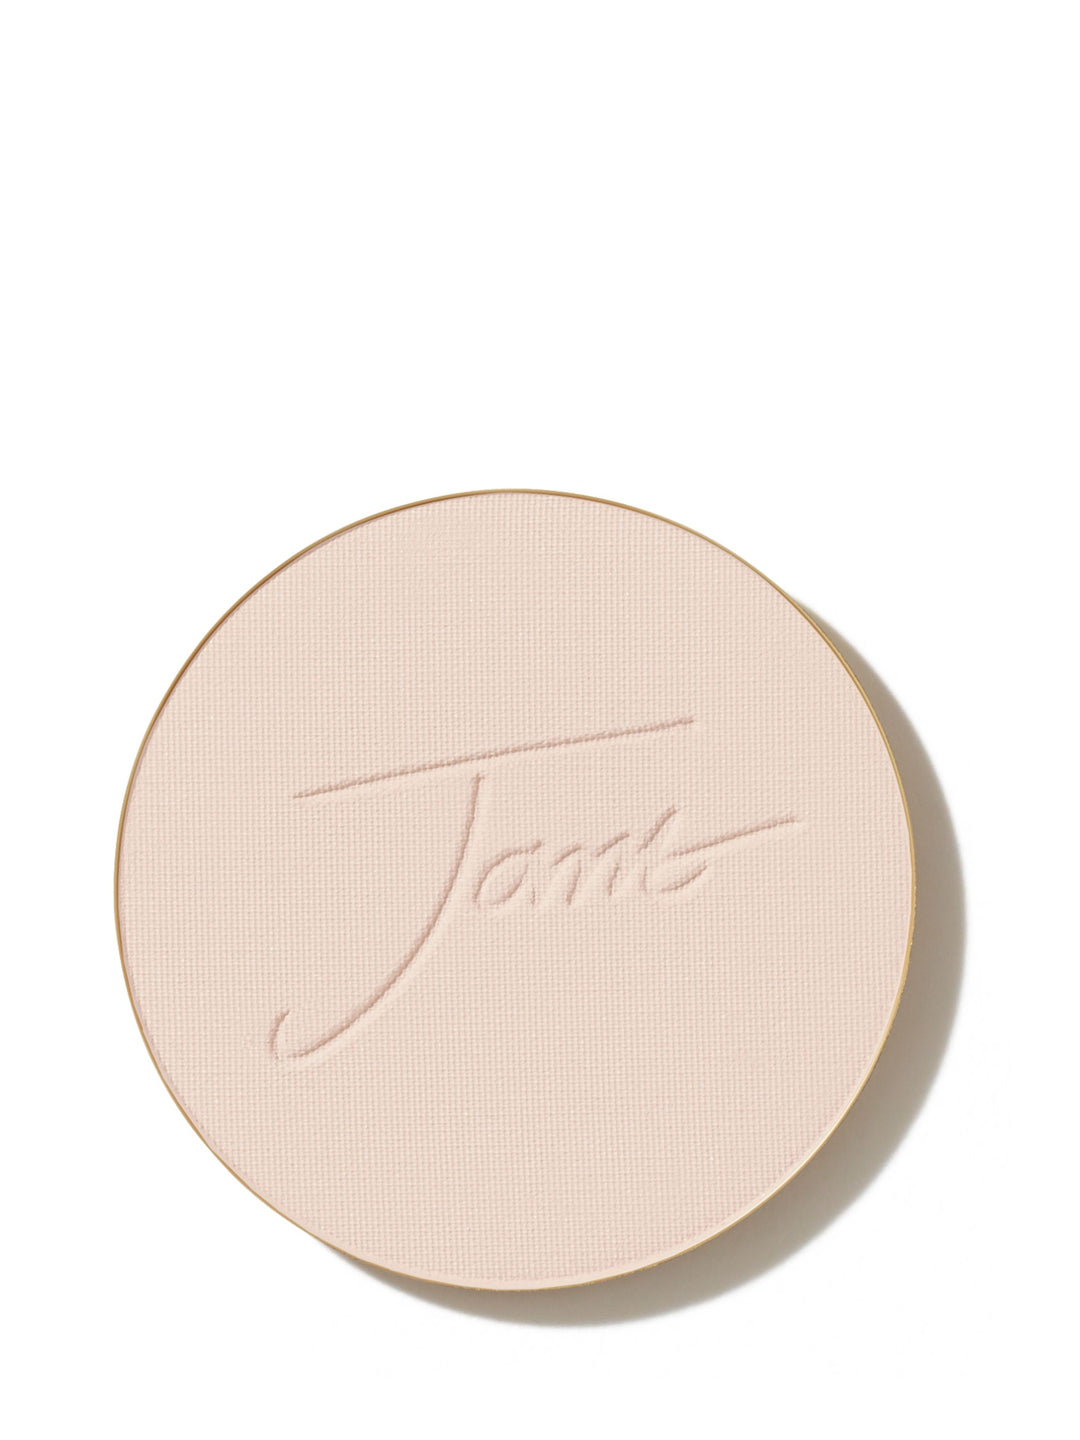 Jane Iredale ivory purepressed mineral foundation refill spf 20